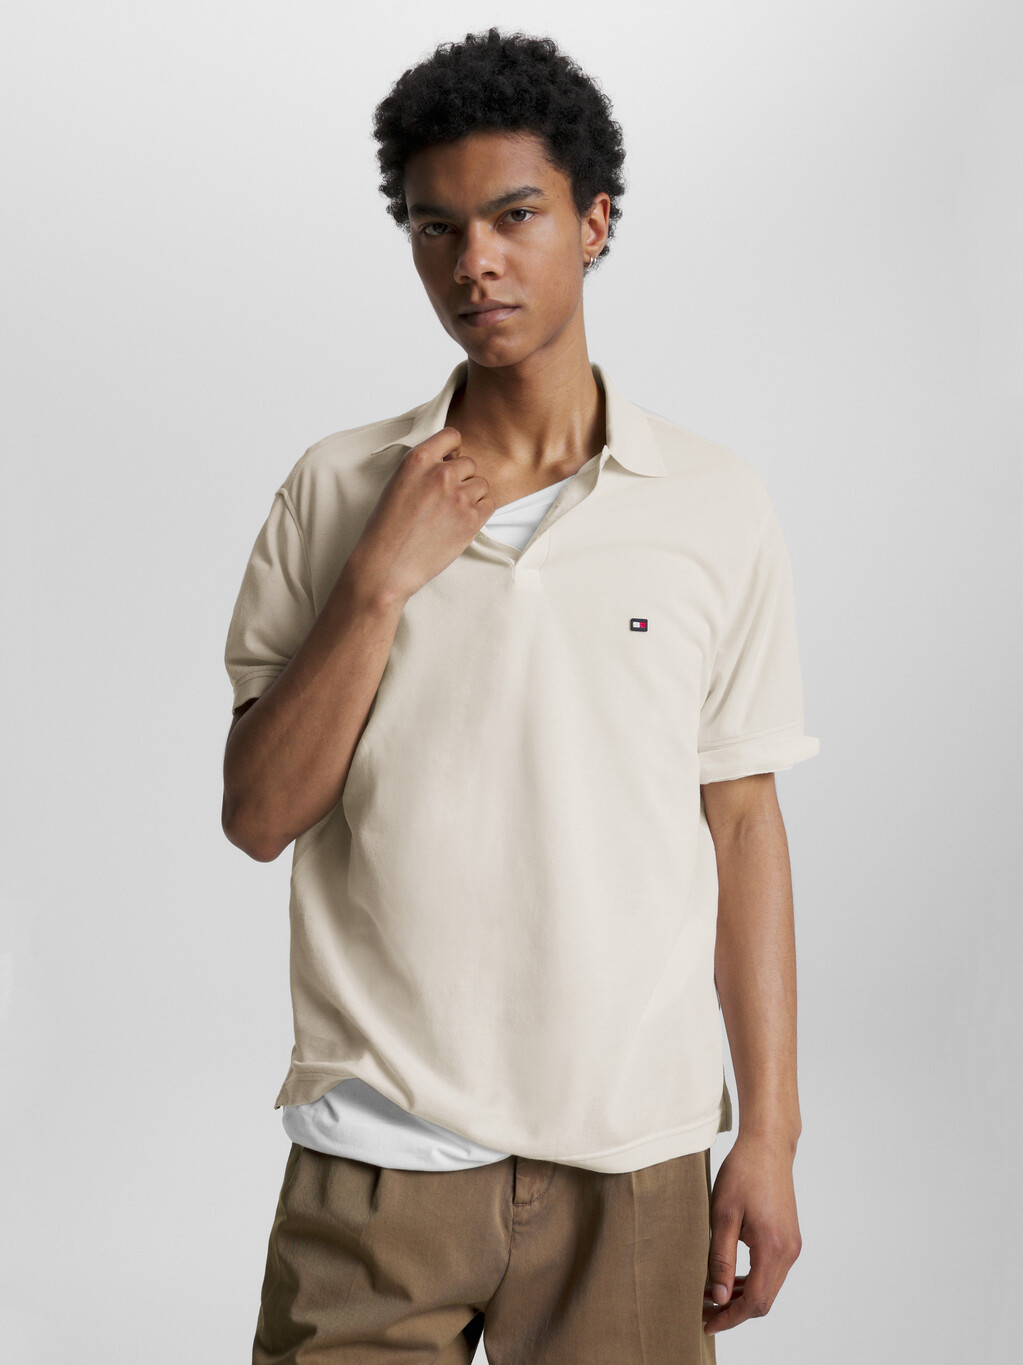 Tommy Hilfiger X Shawn Mendes Polo, Weathered White, hi-res